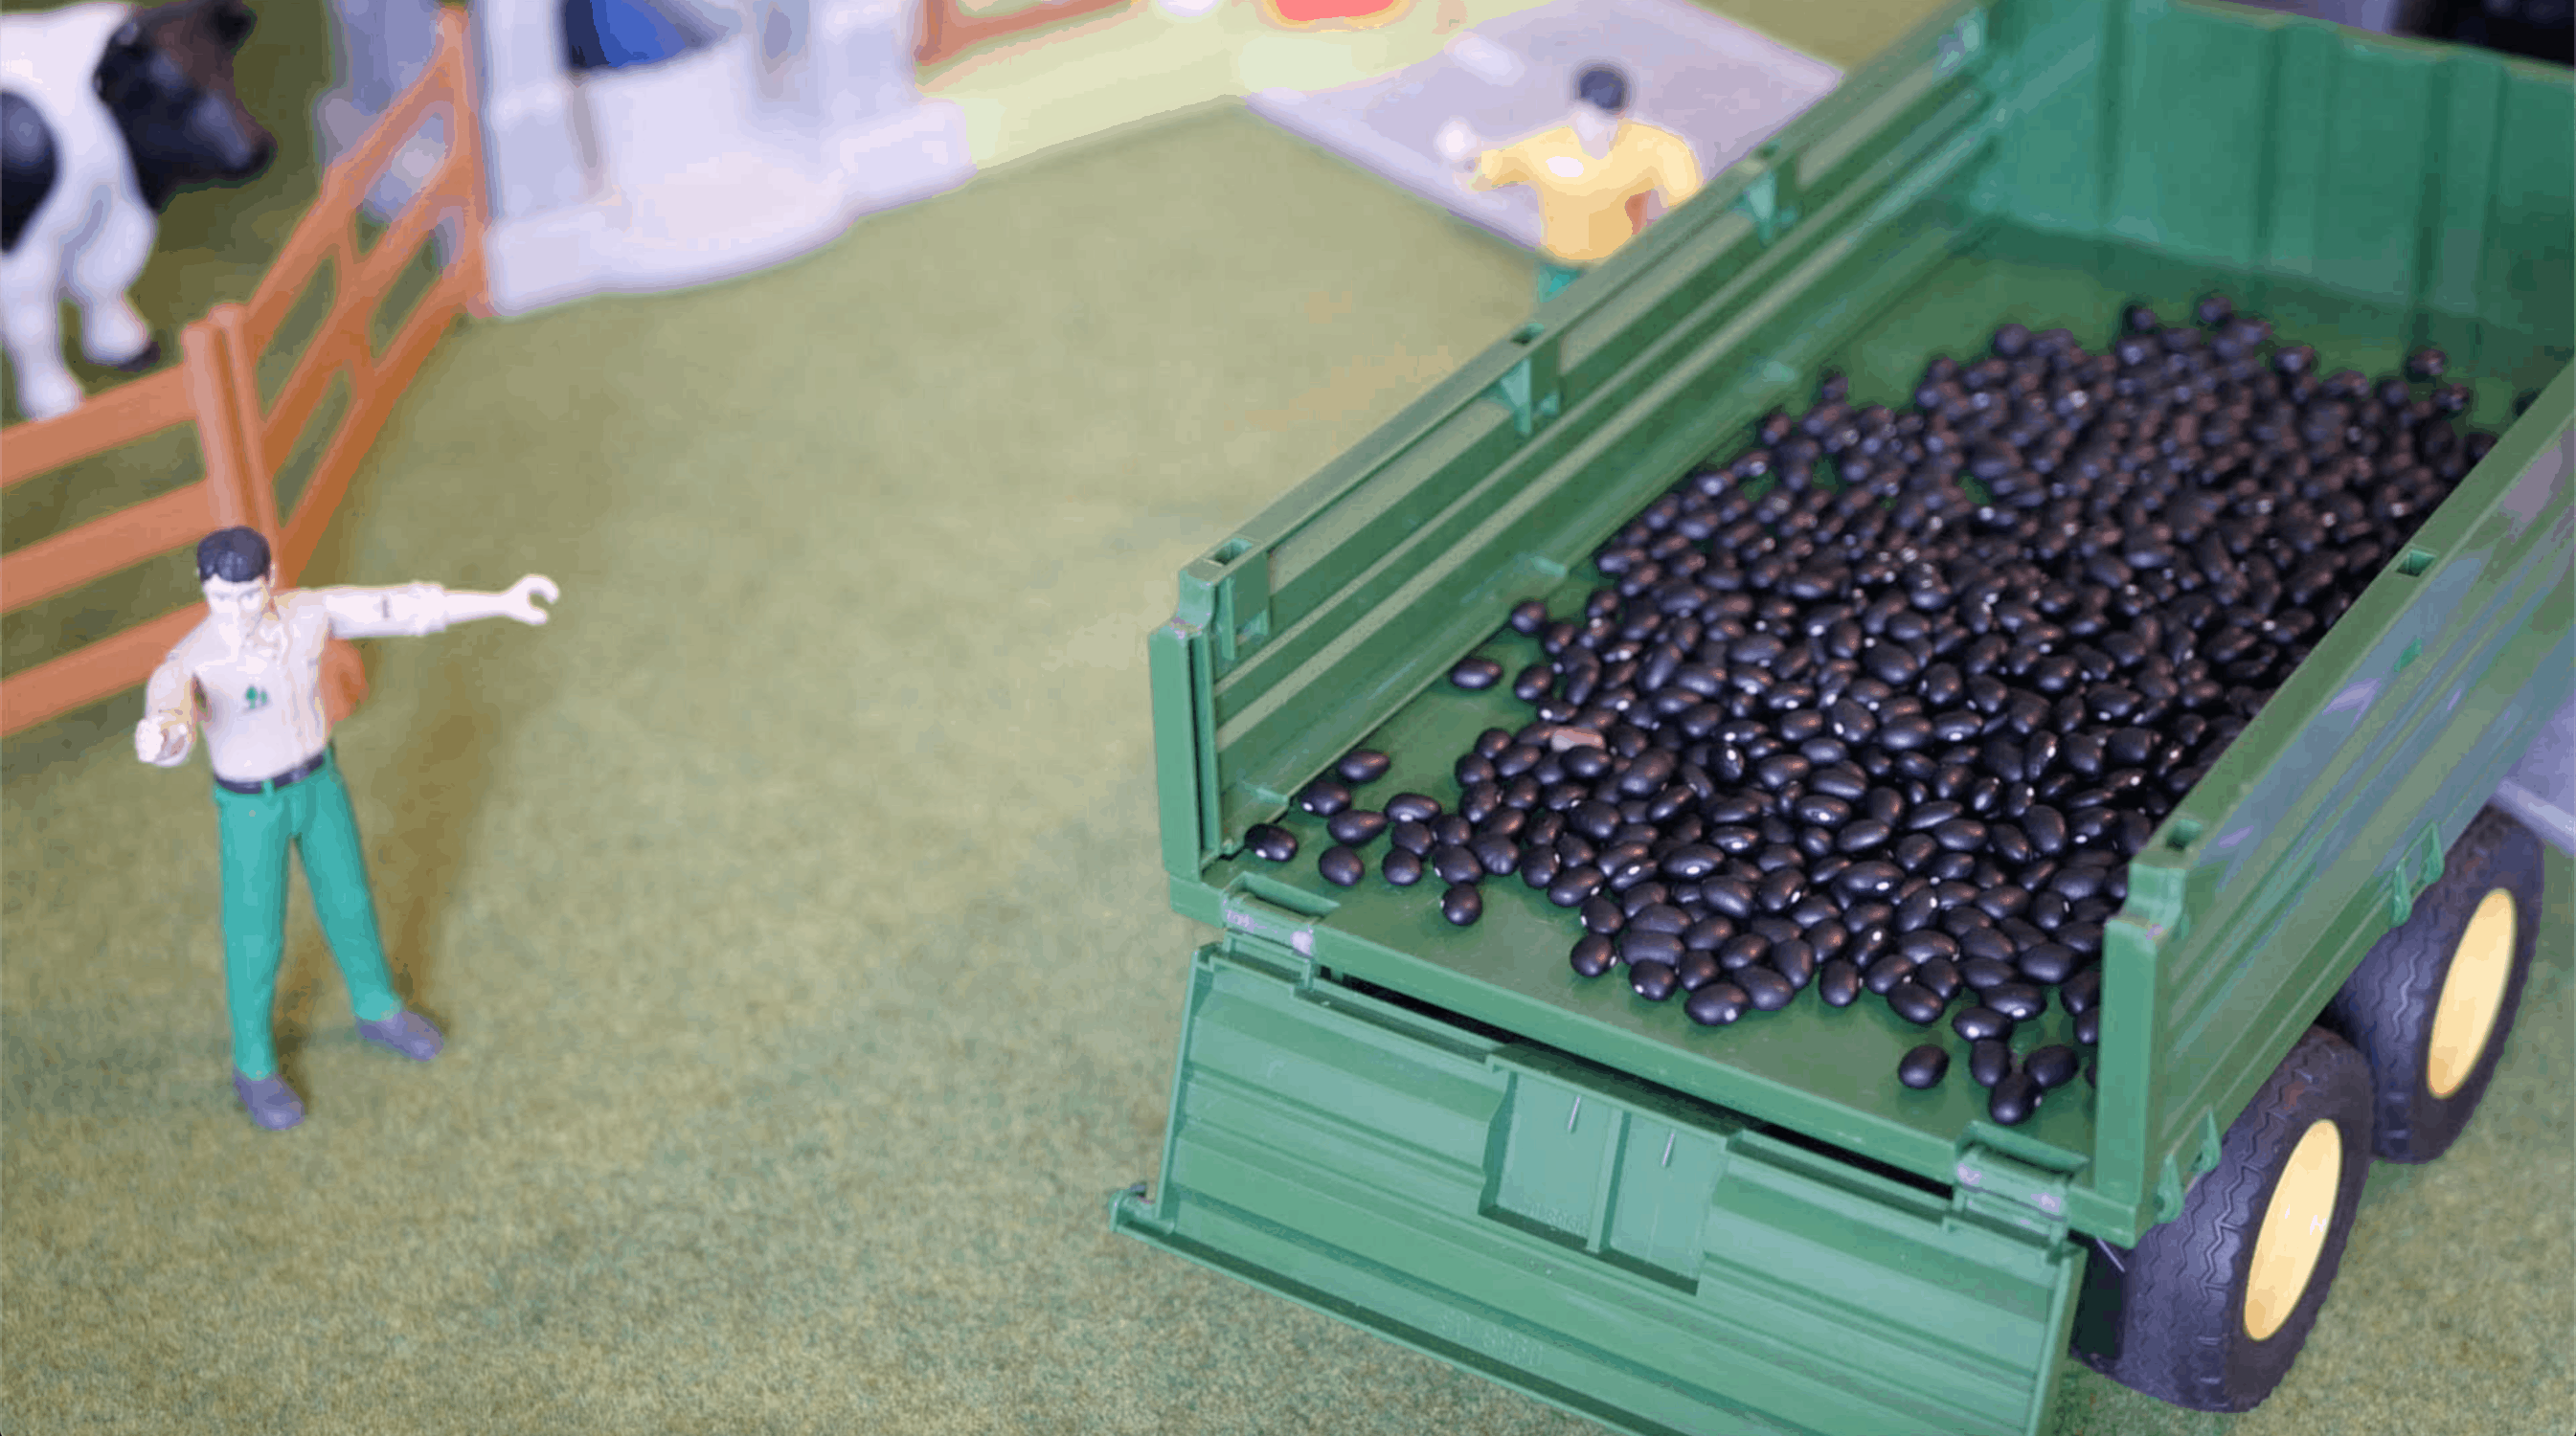 Black beans for toy tractors